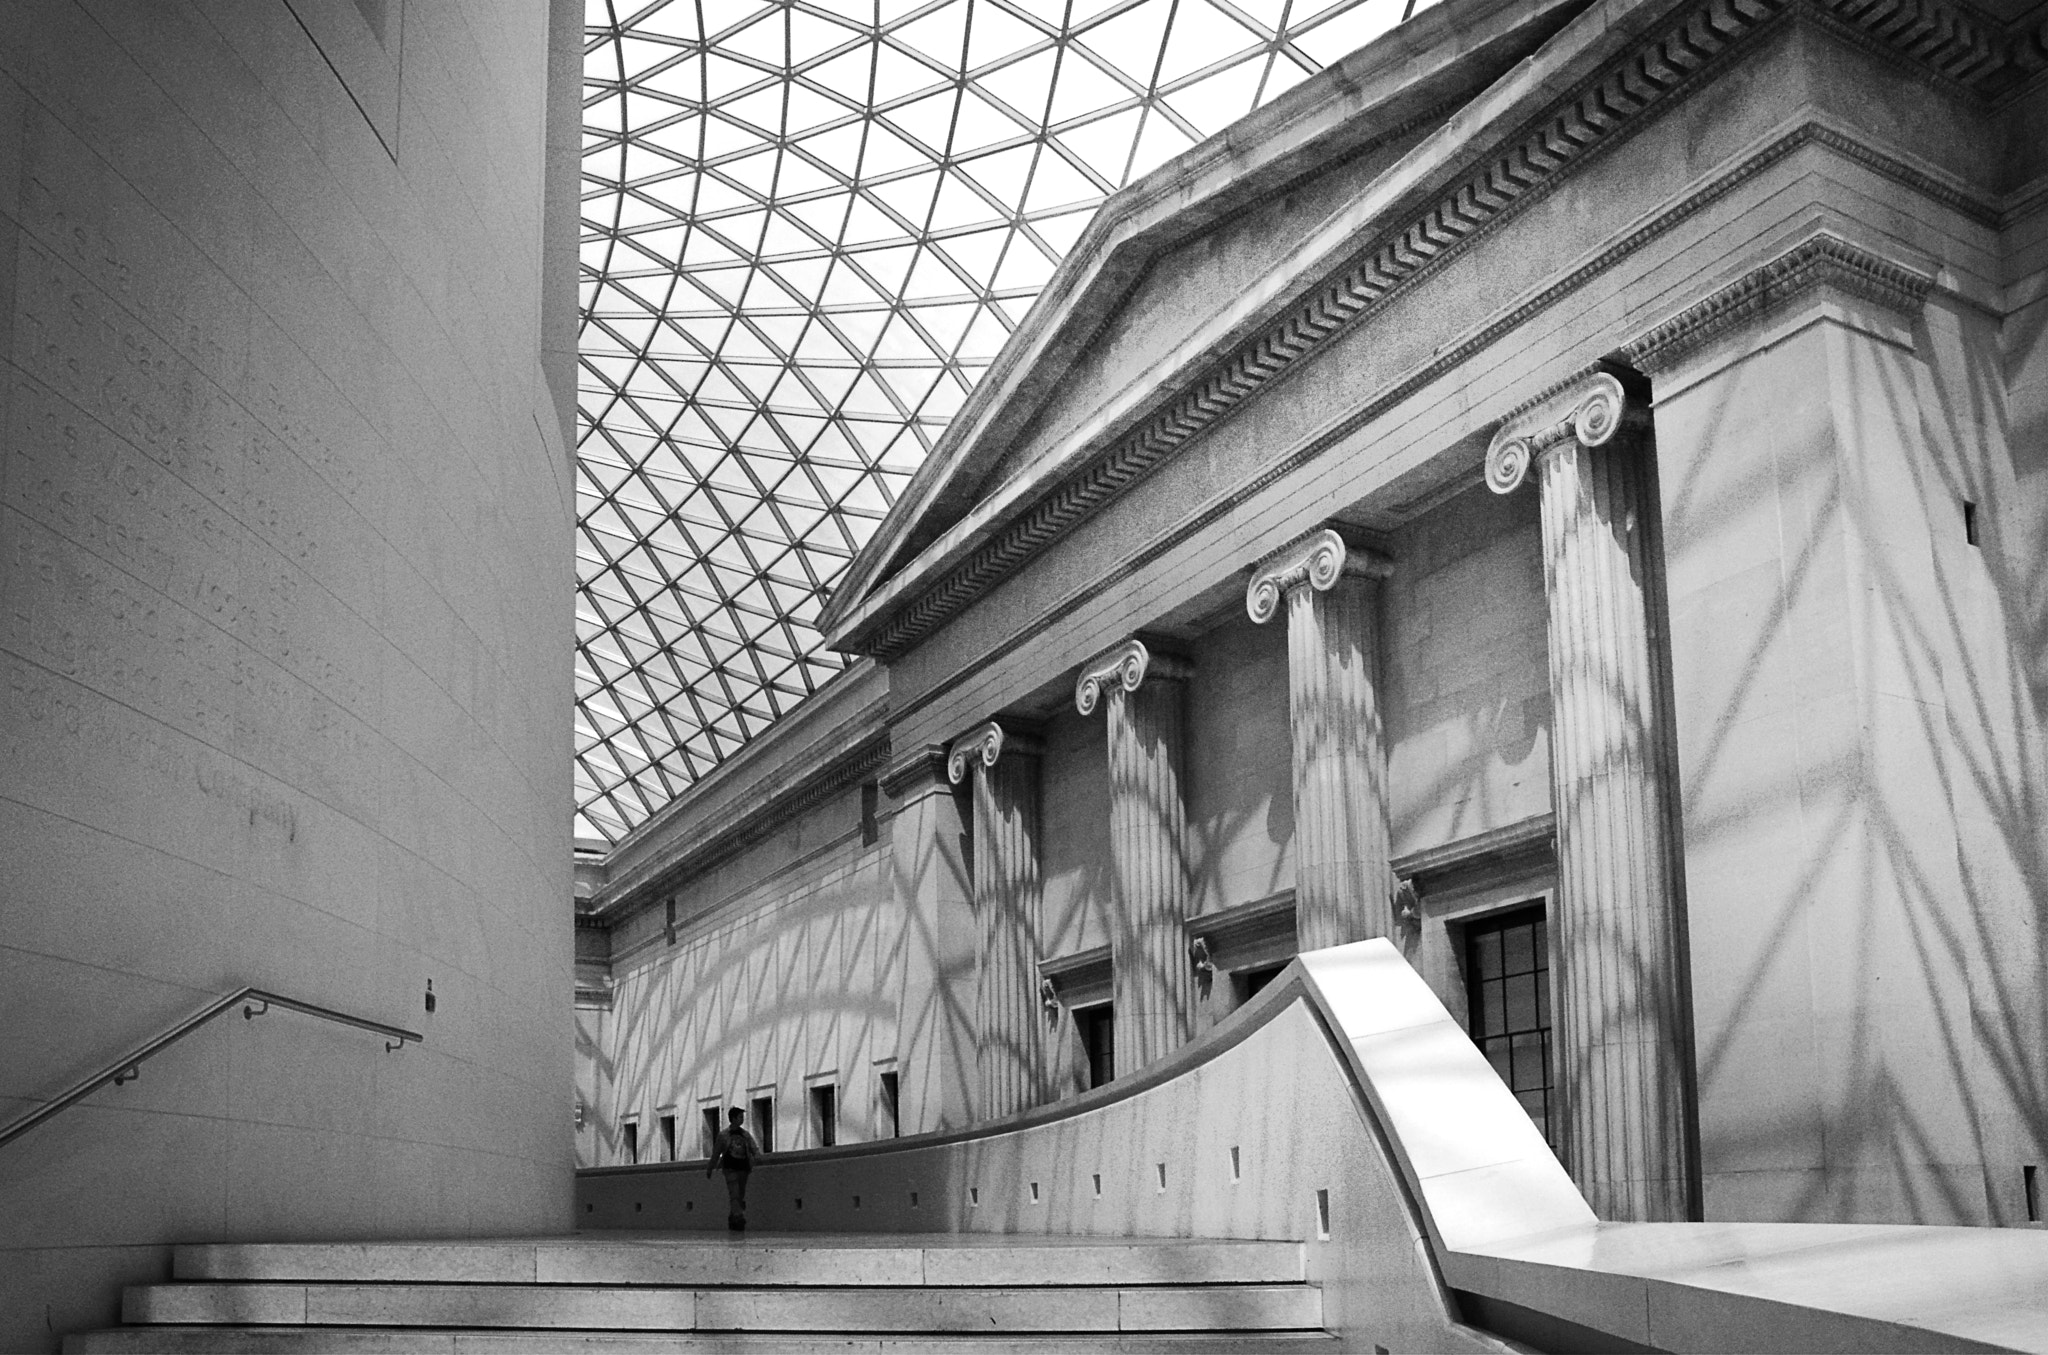 Nikon D7100 sample photo. The great court "the british museum" photography